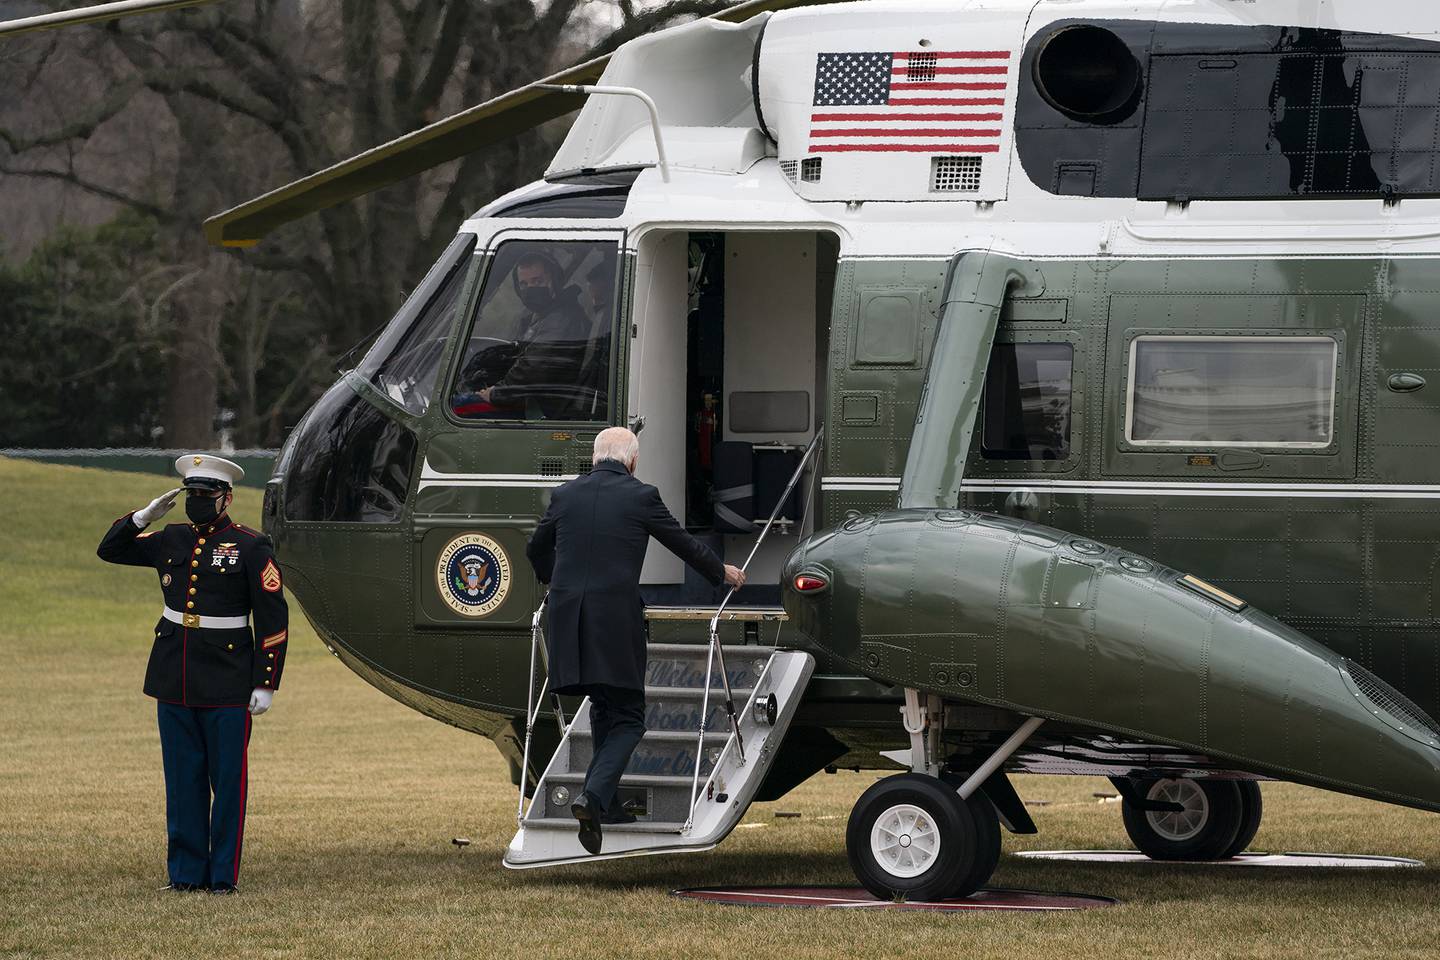 President Joe Biden boards Marine One to visit wounded troops at Walter Reed National Military Medical Center, on the South Lawn of the White House, Friday, Jan. 29, 2021, in Washington.